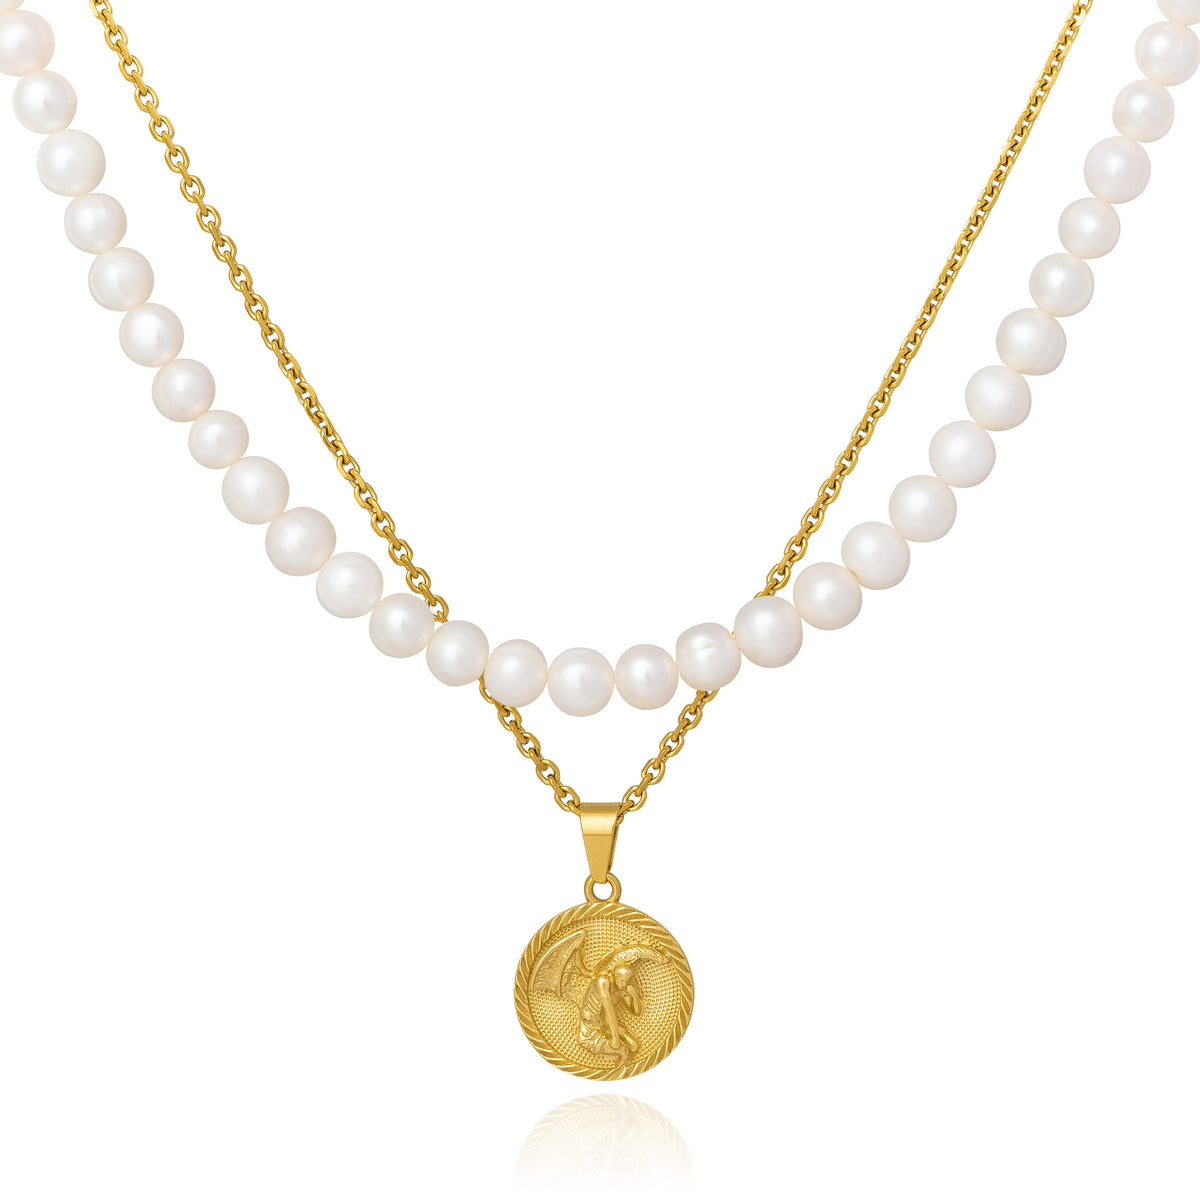 Pearl chain Set gold medallion pendant necklace by statement collective 